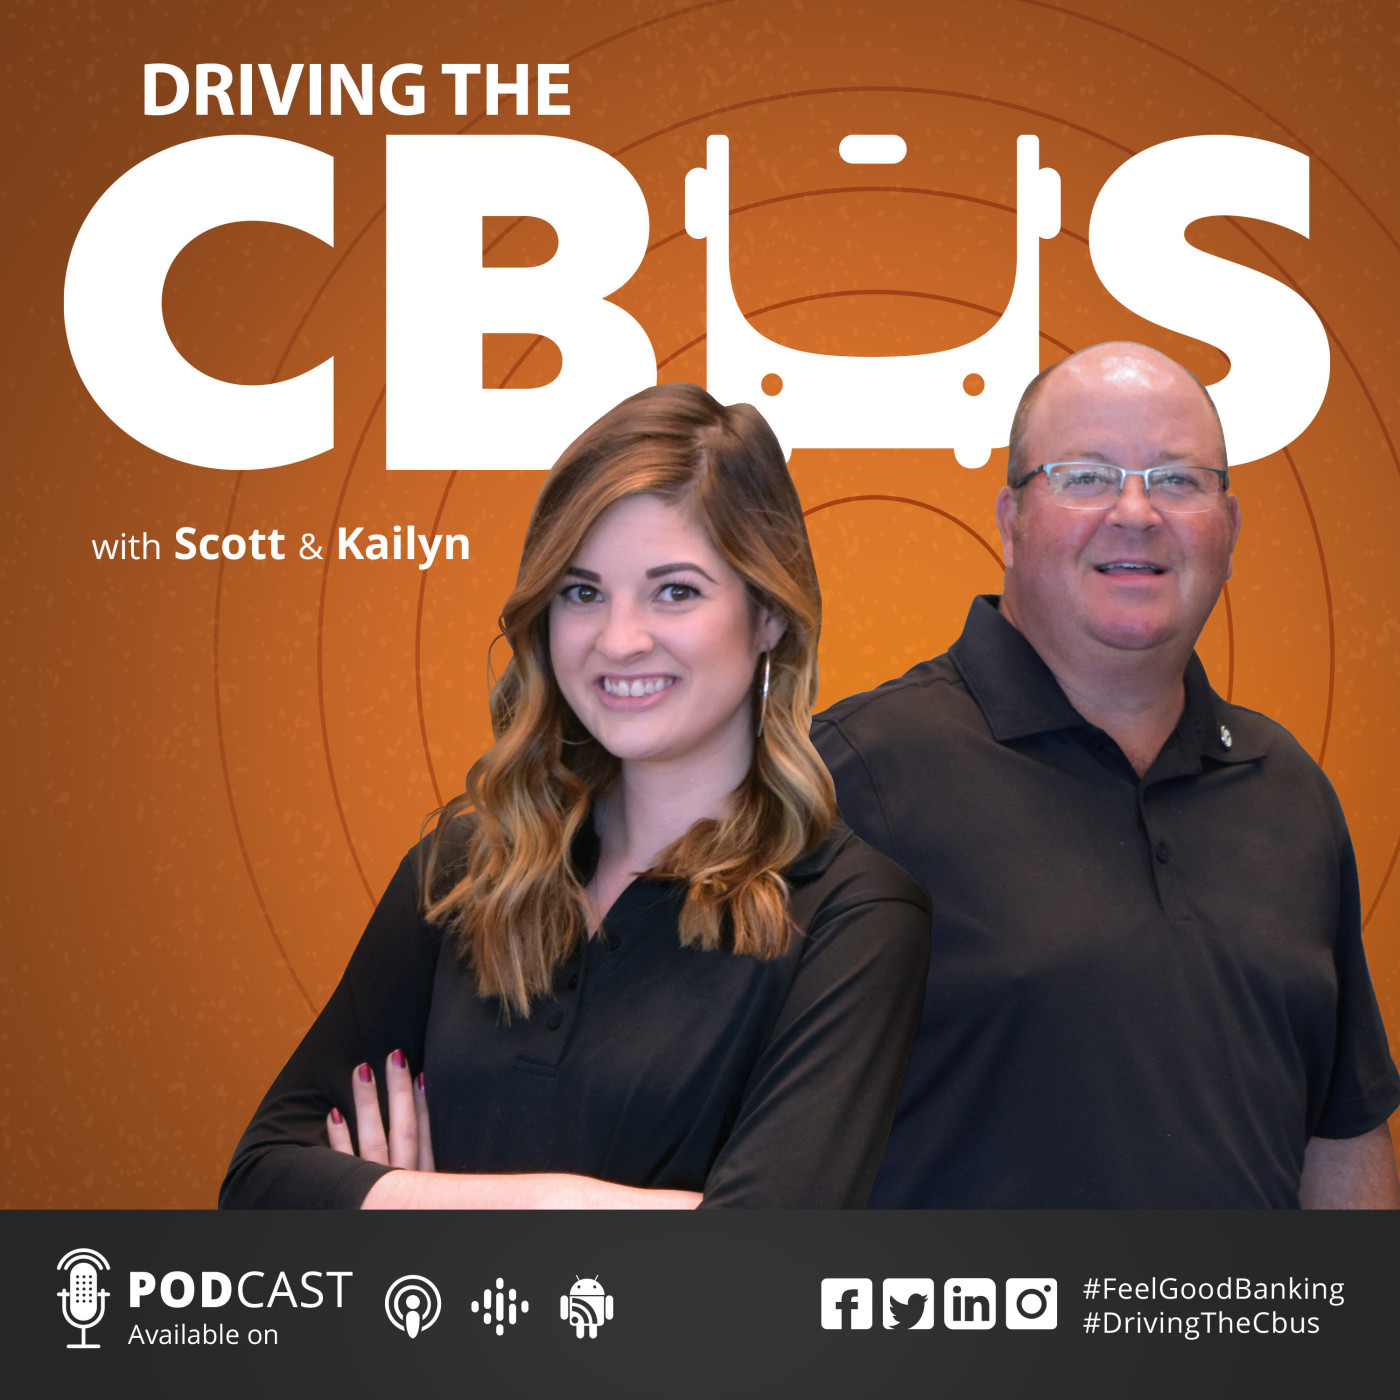 Driving The Cbus Podcast from Heartland Bank